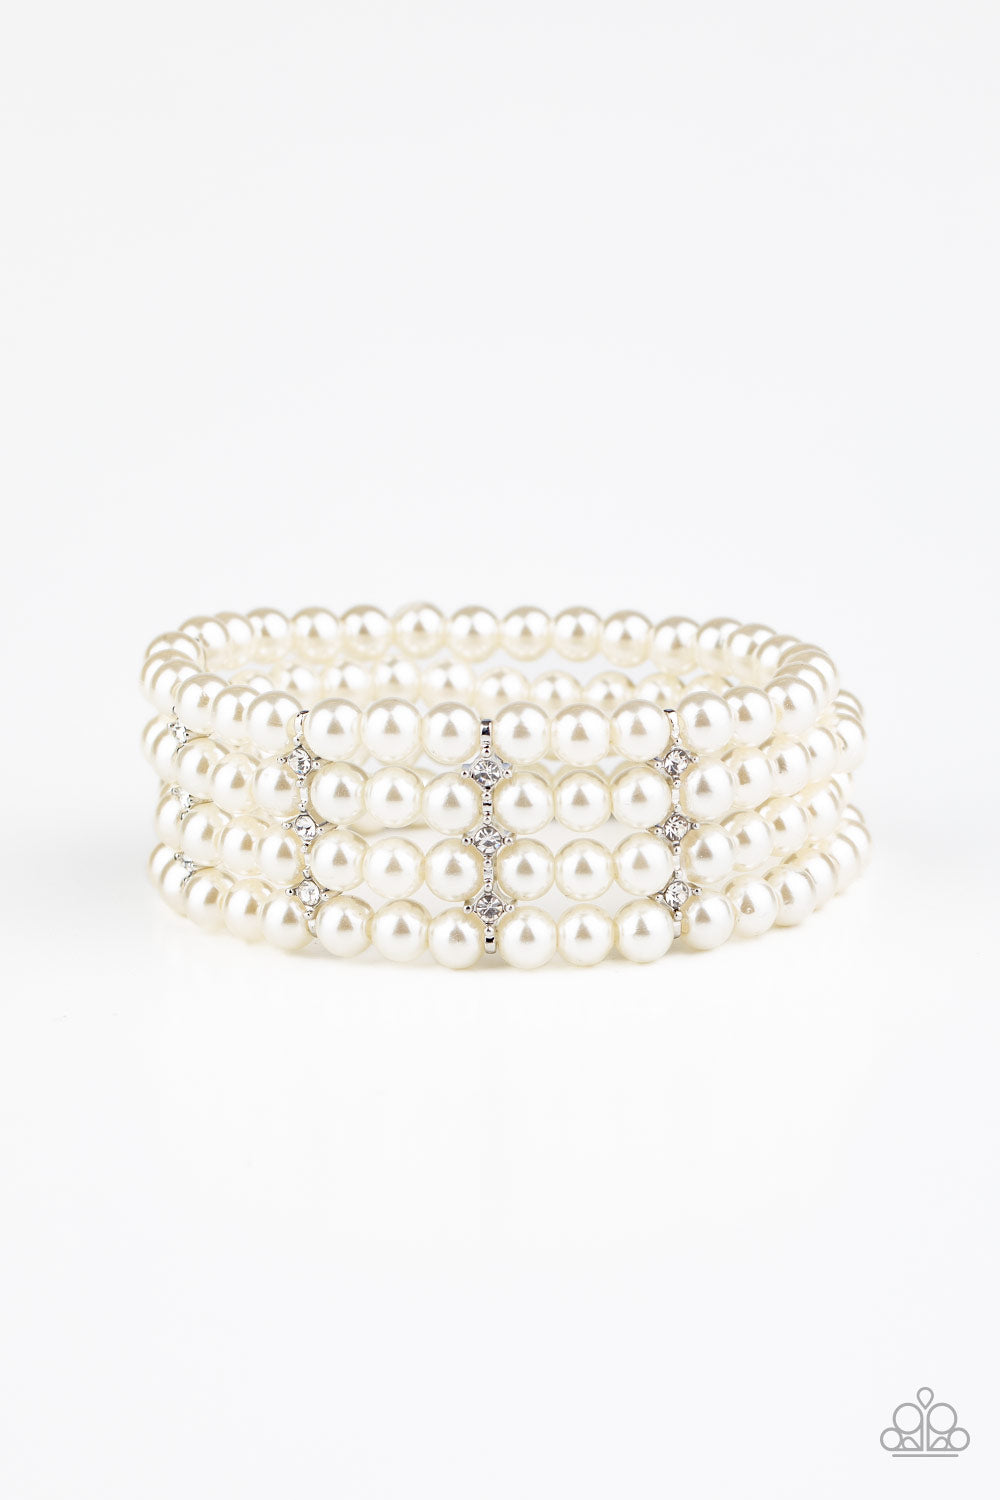 Stacked To The Top White Bracelet